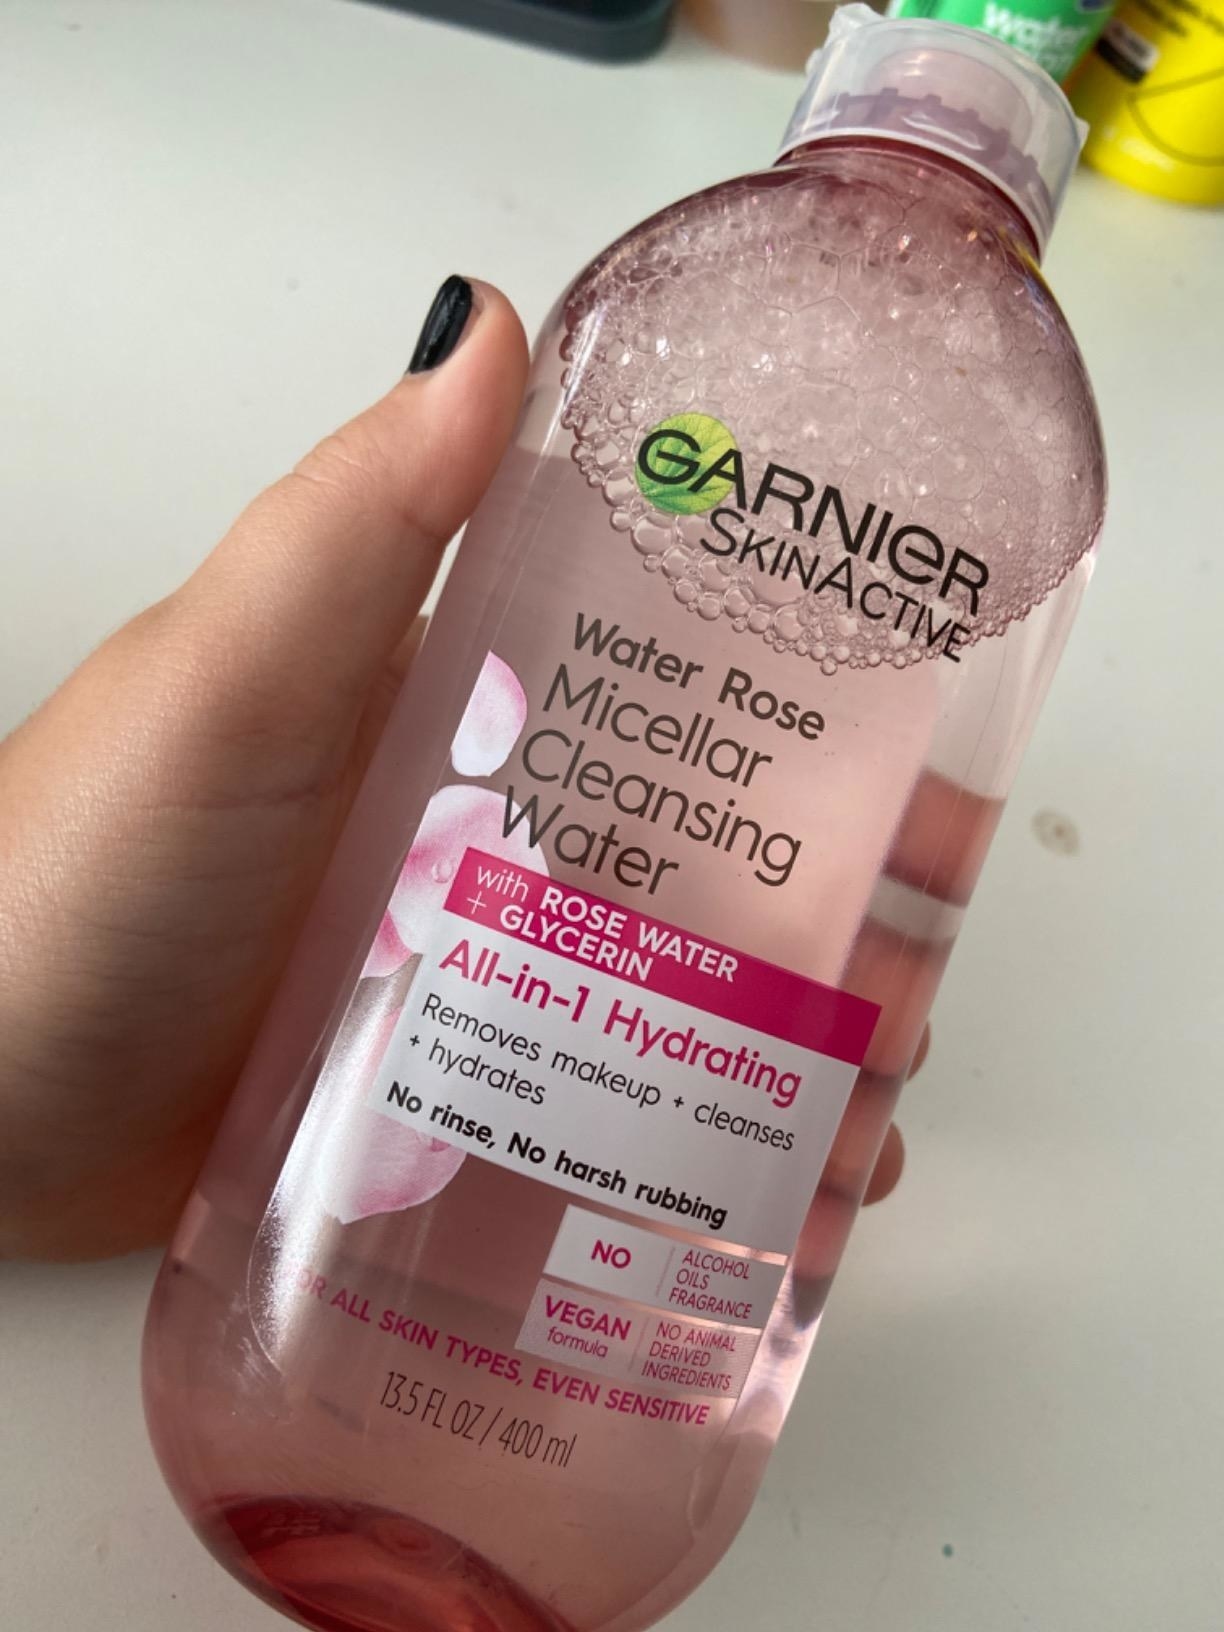 Reviewer photo of them holding the bottle of Garnier SkinActive rose micellar water